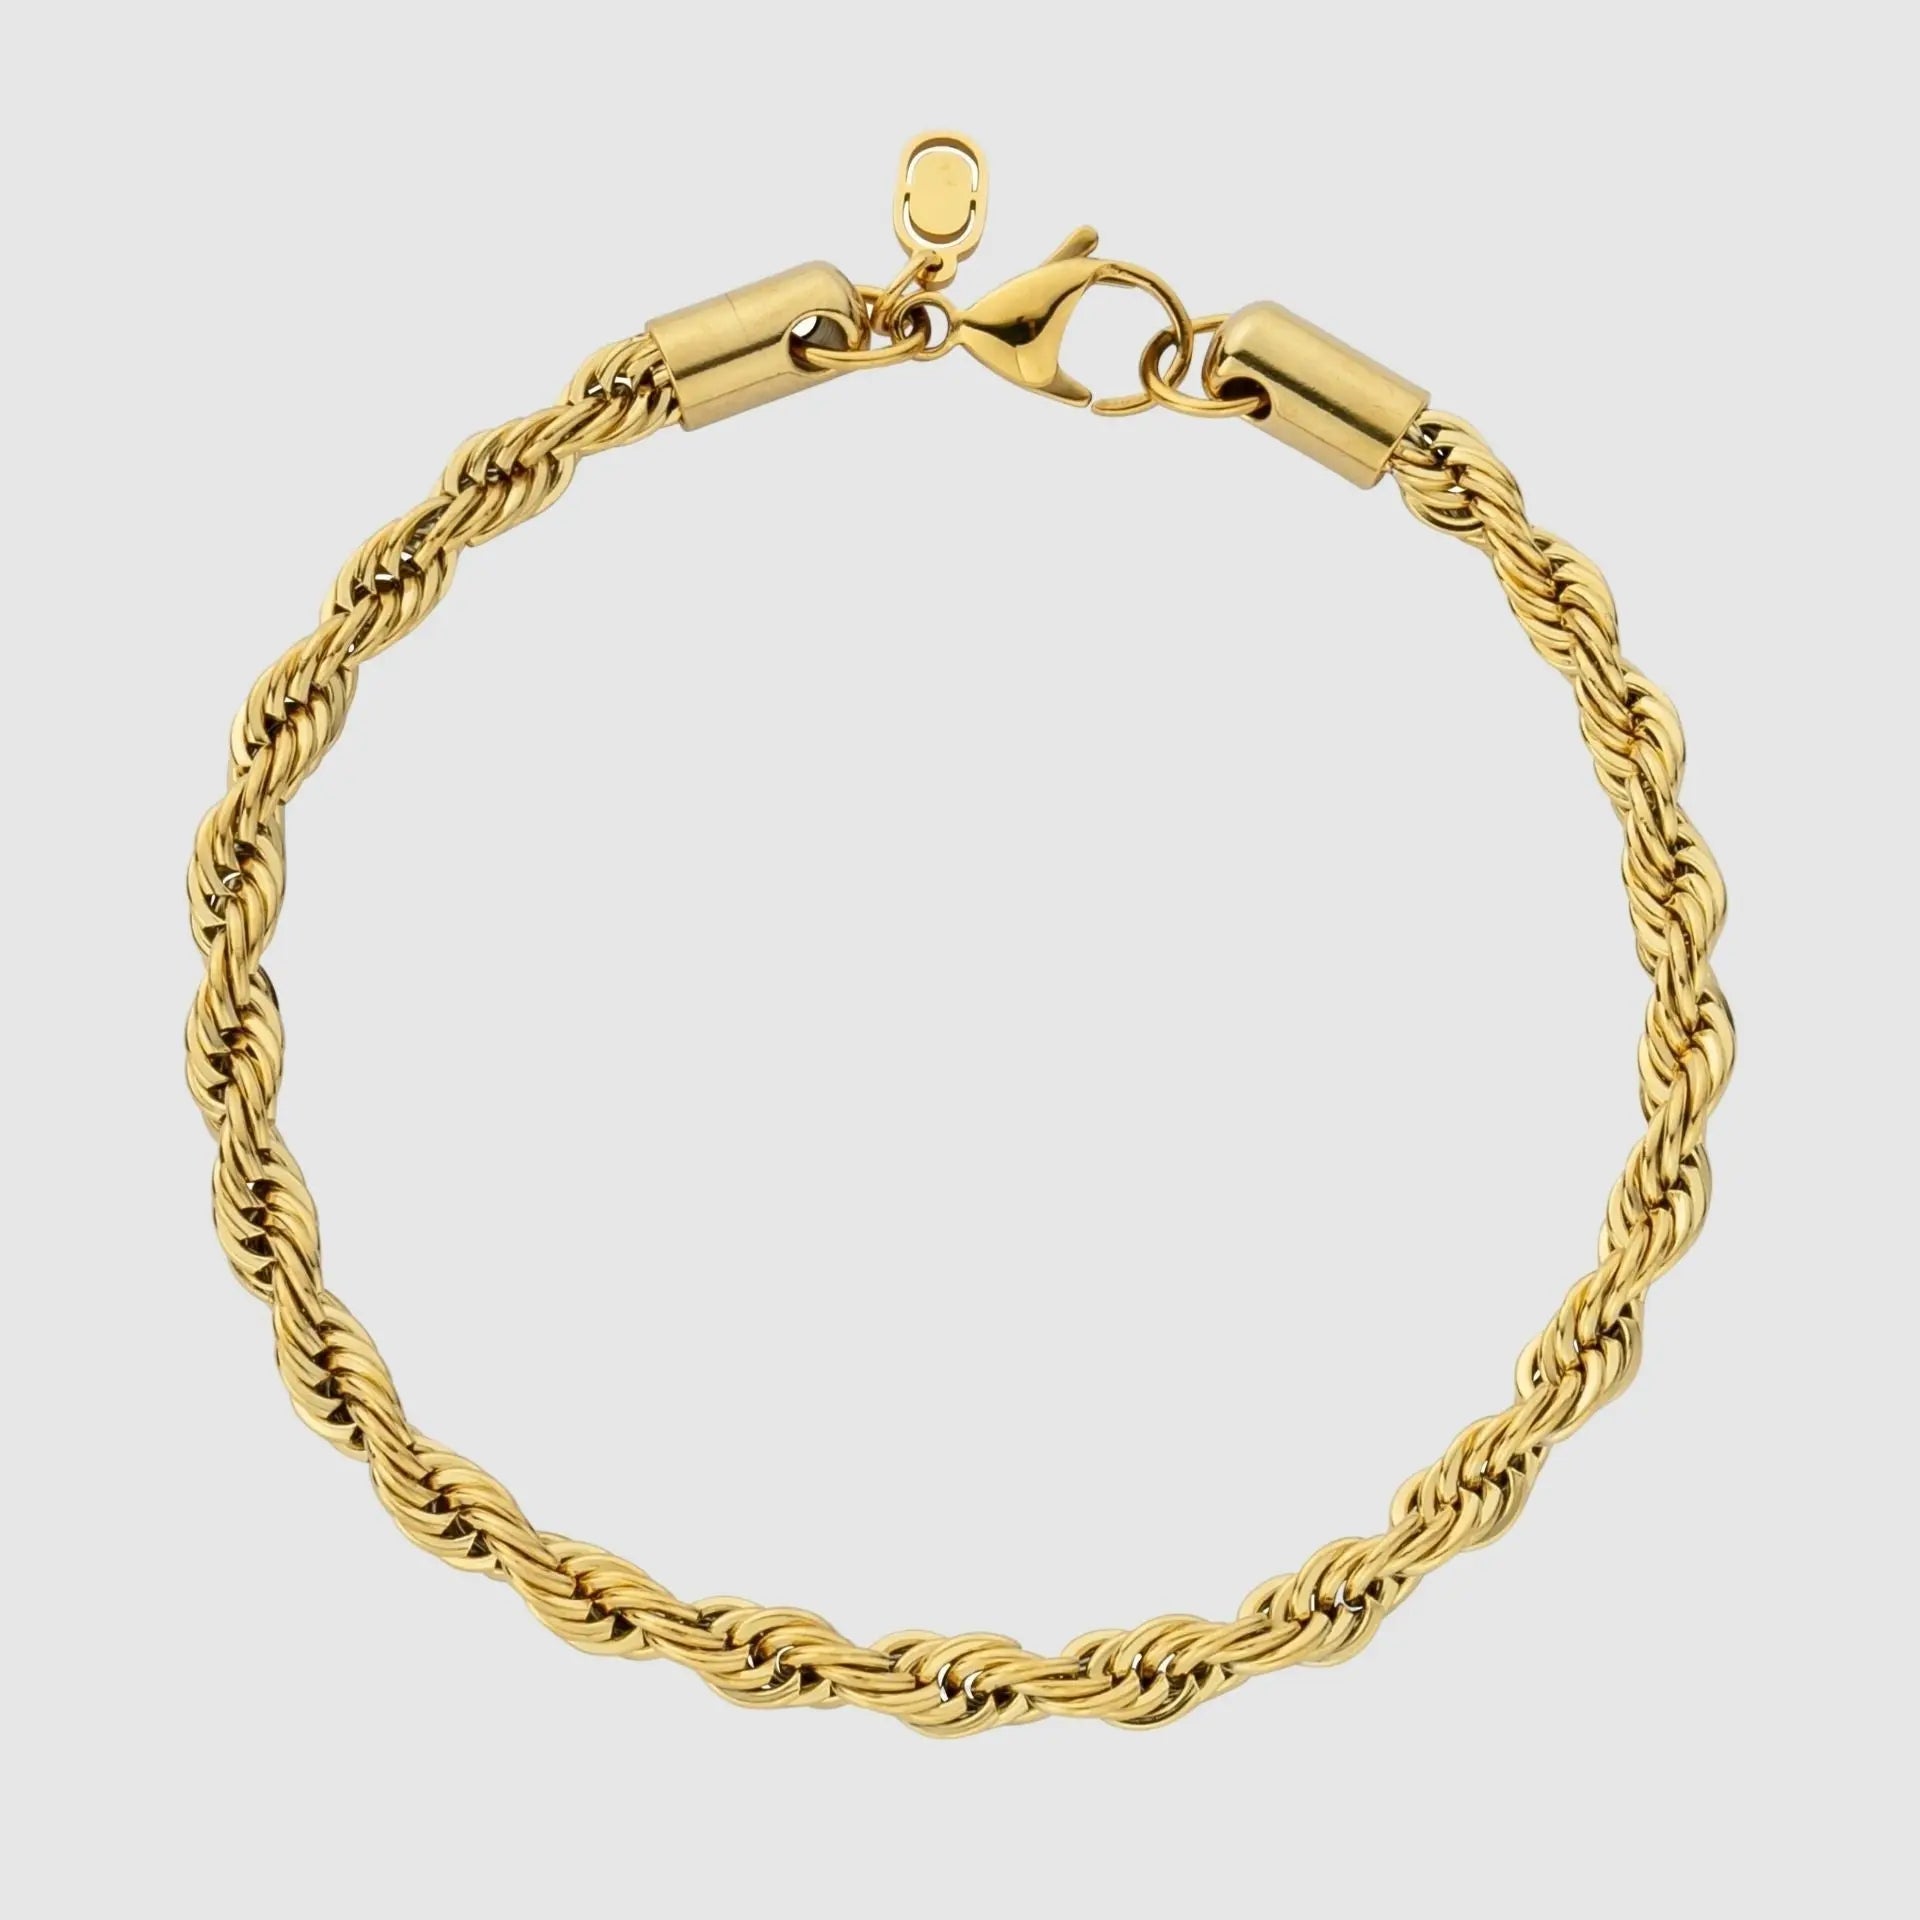 Rope Bracelet (Gold) 5mm MIXX CHAINS